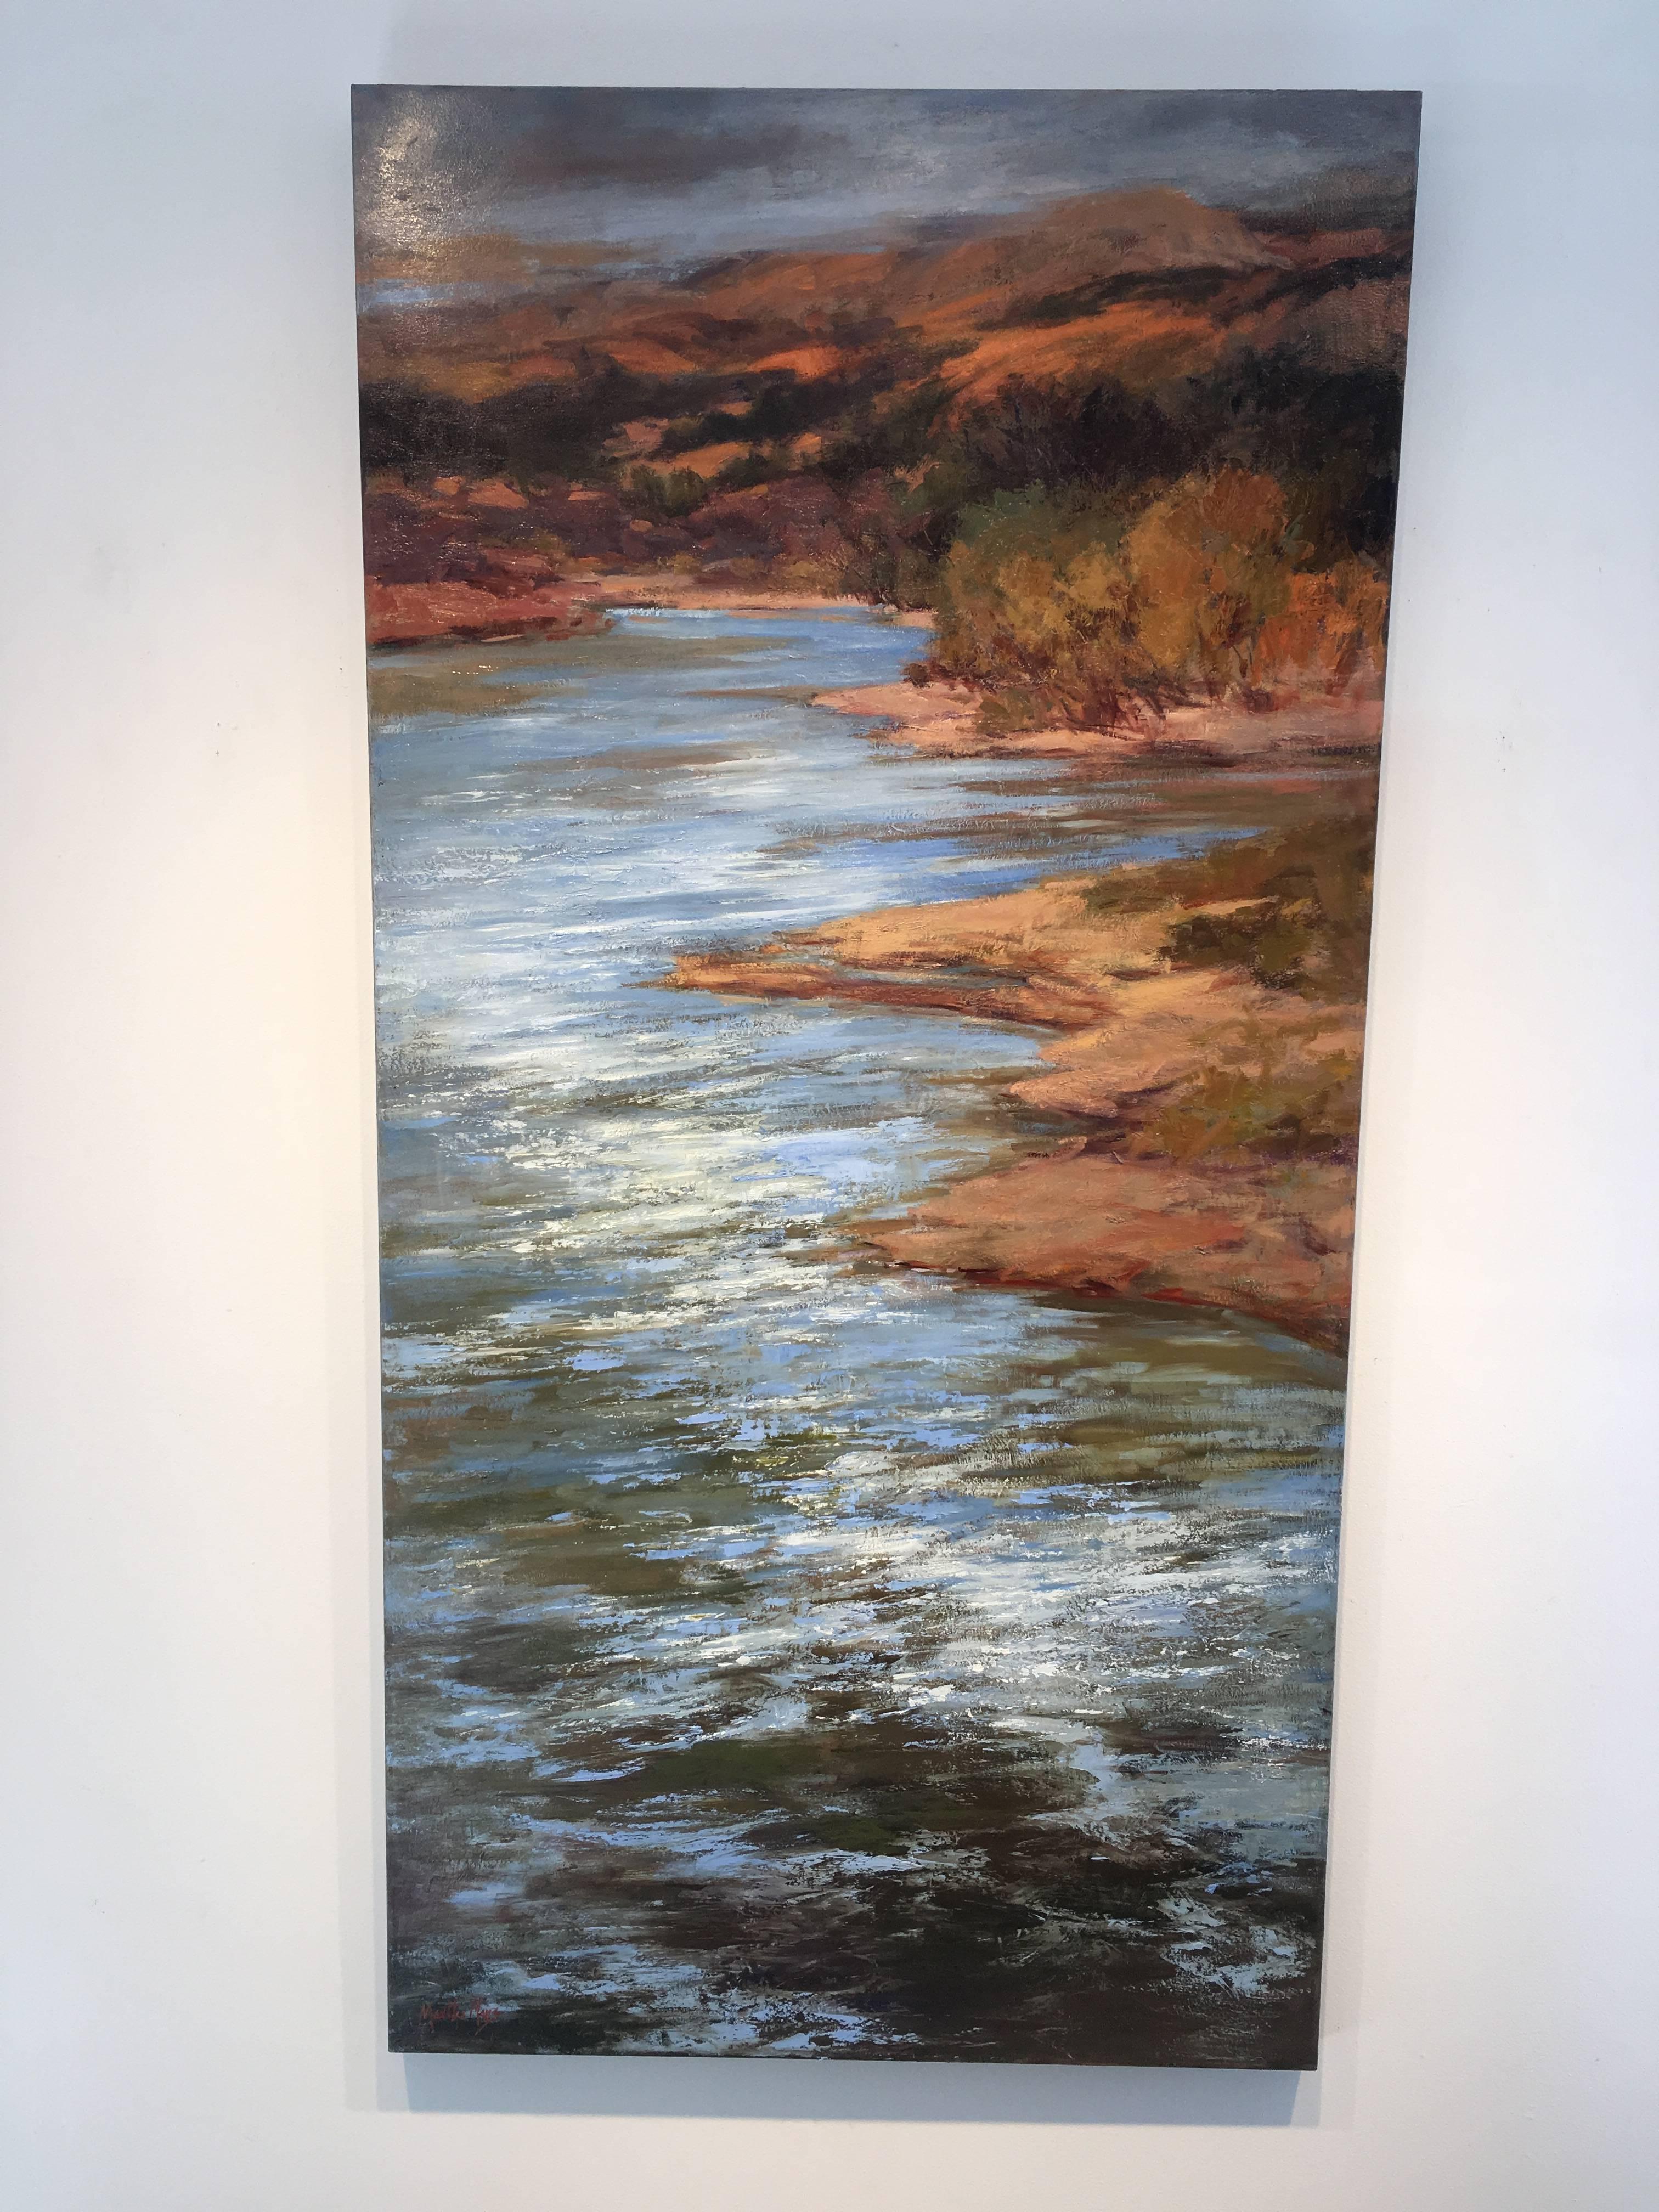 River's Edge - Chama River - Painting by Martha Mans